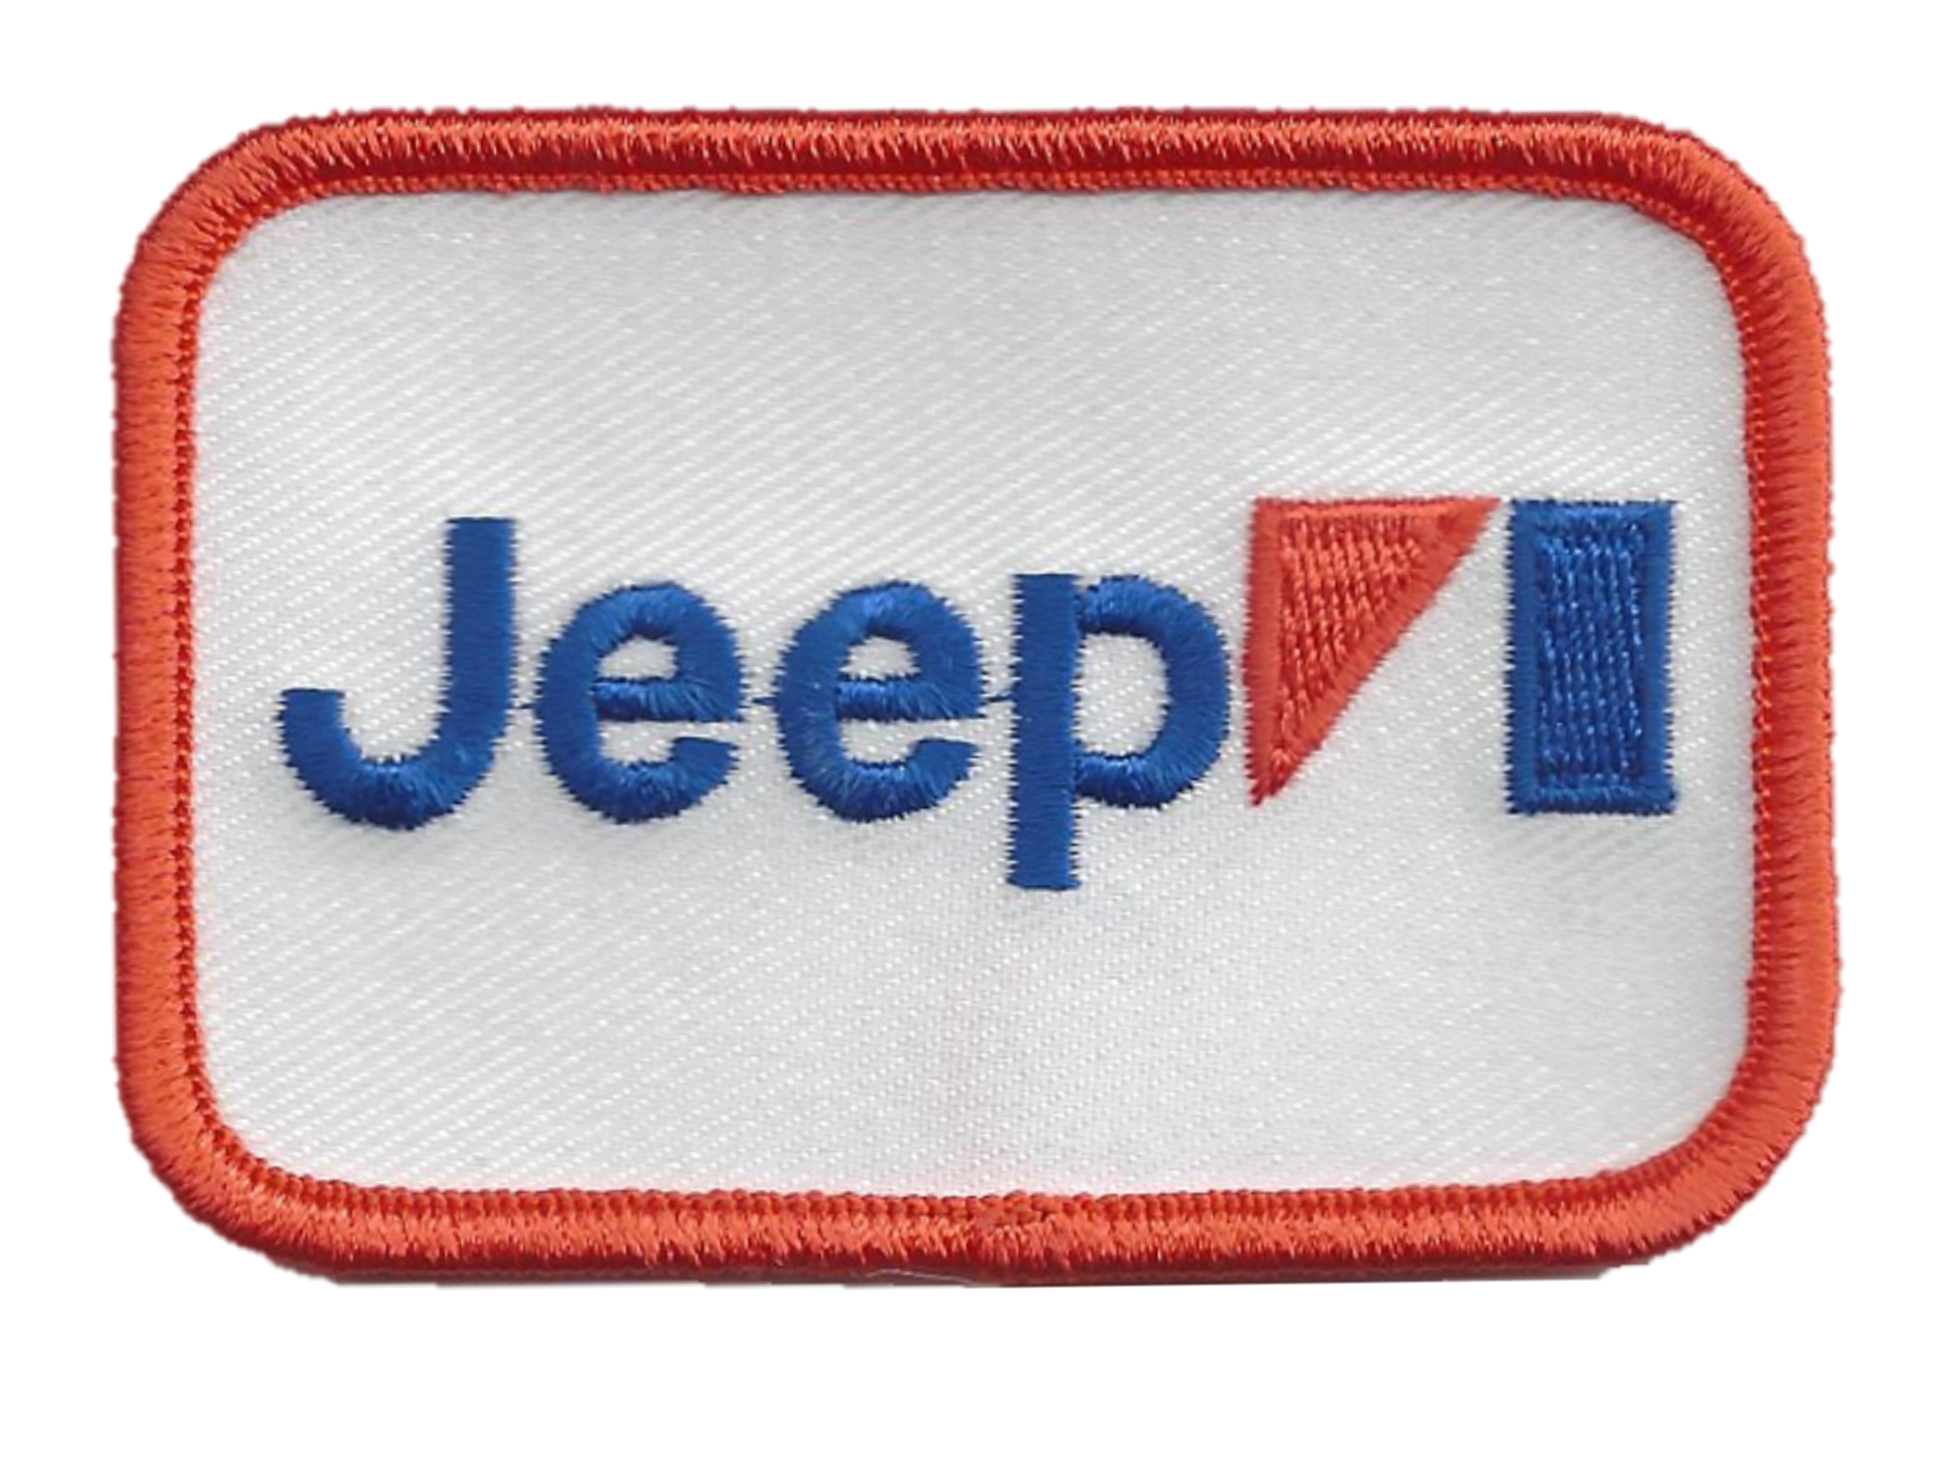 VINTAGE STYLE JEEP PATCH – ABC PATCHES